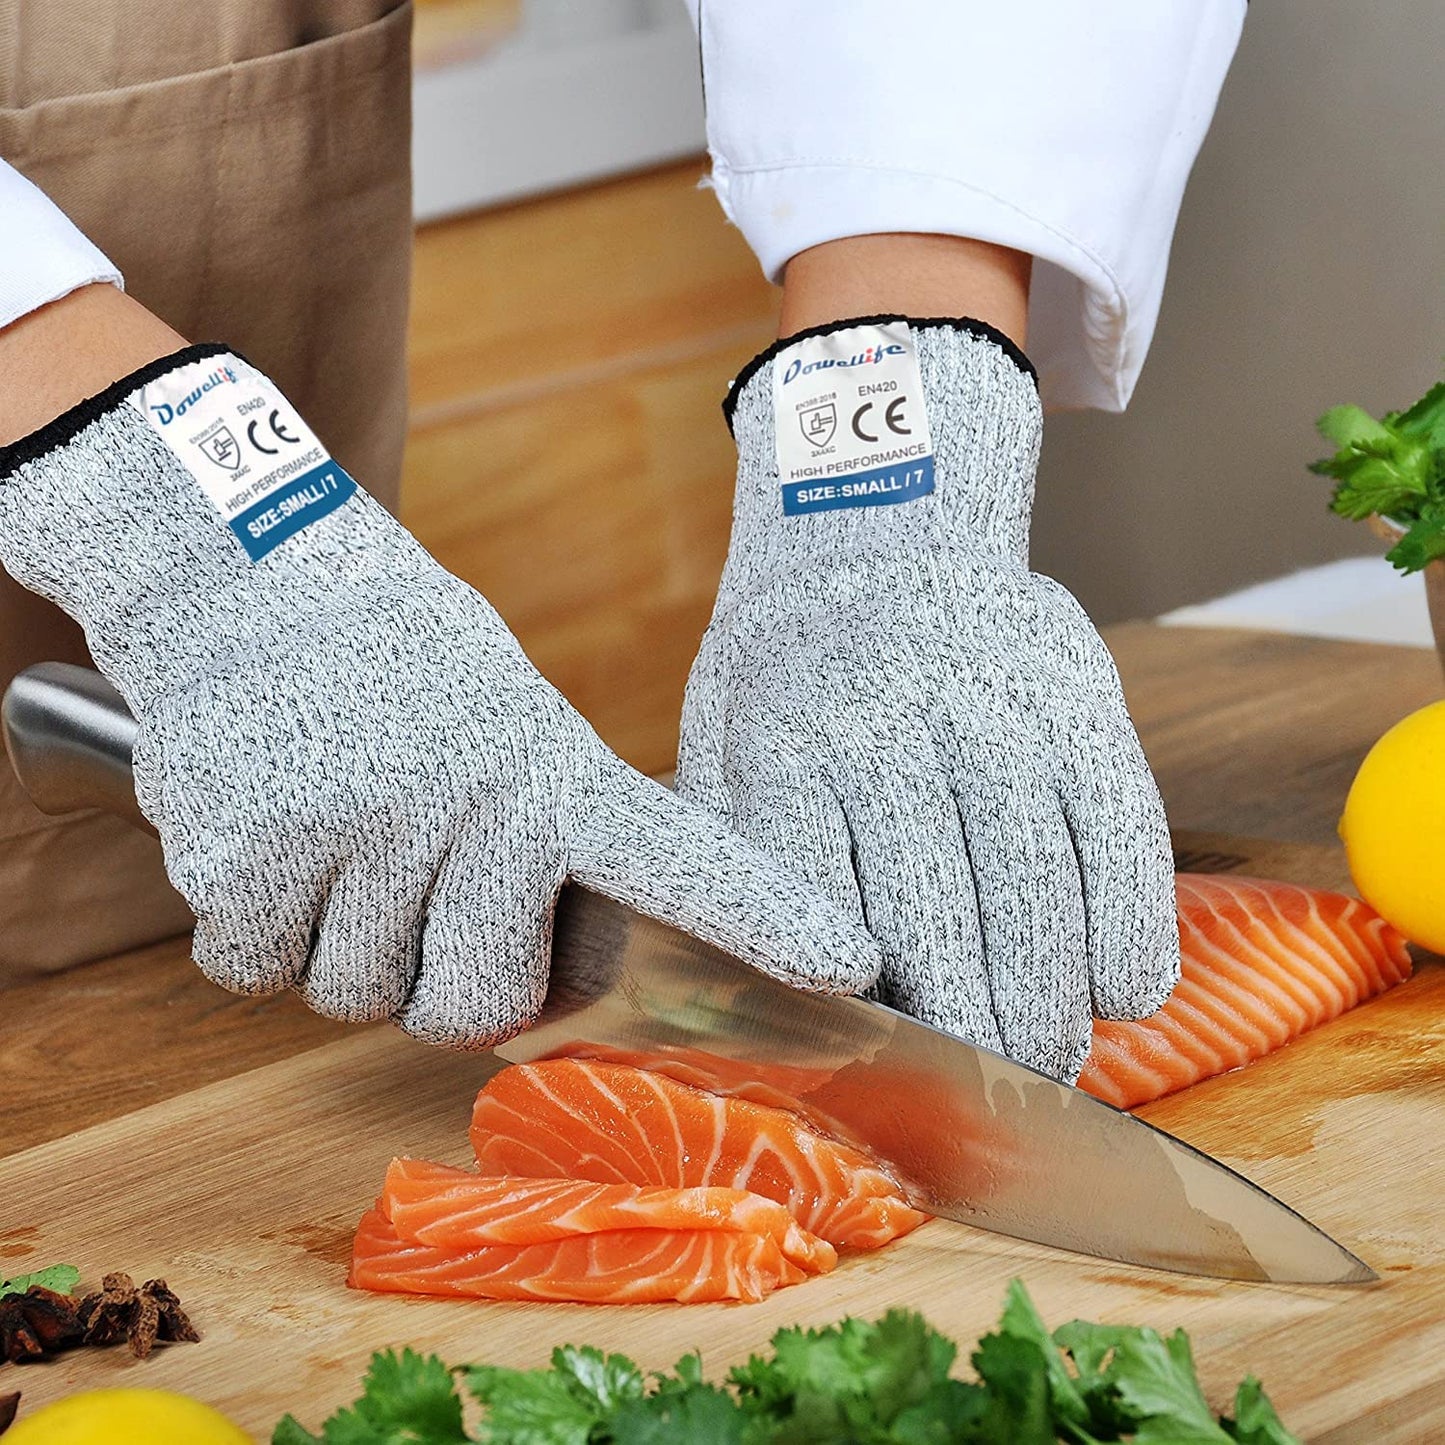 Cut Resistant Gloves Food Grade Level 5 Protection, Safety Kitchen Cuts Gloves for Oyster Shucking, Fish Fillet Processing, Mandolin Slicing, Meat Cutting and Wood Carving, 1 Pair (Large)